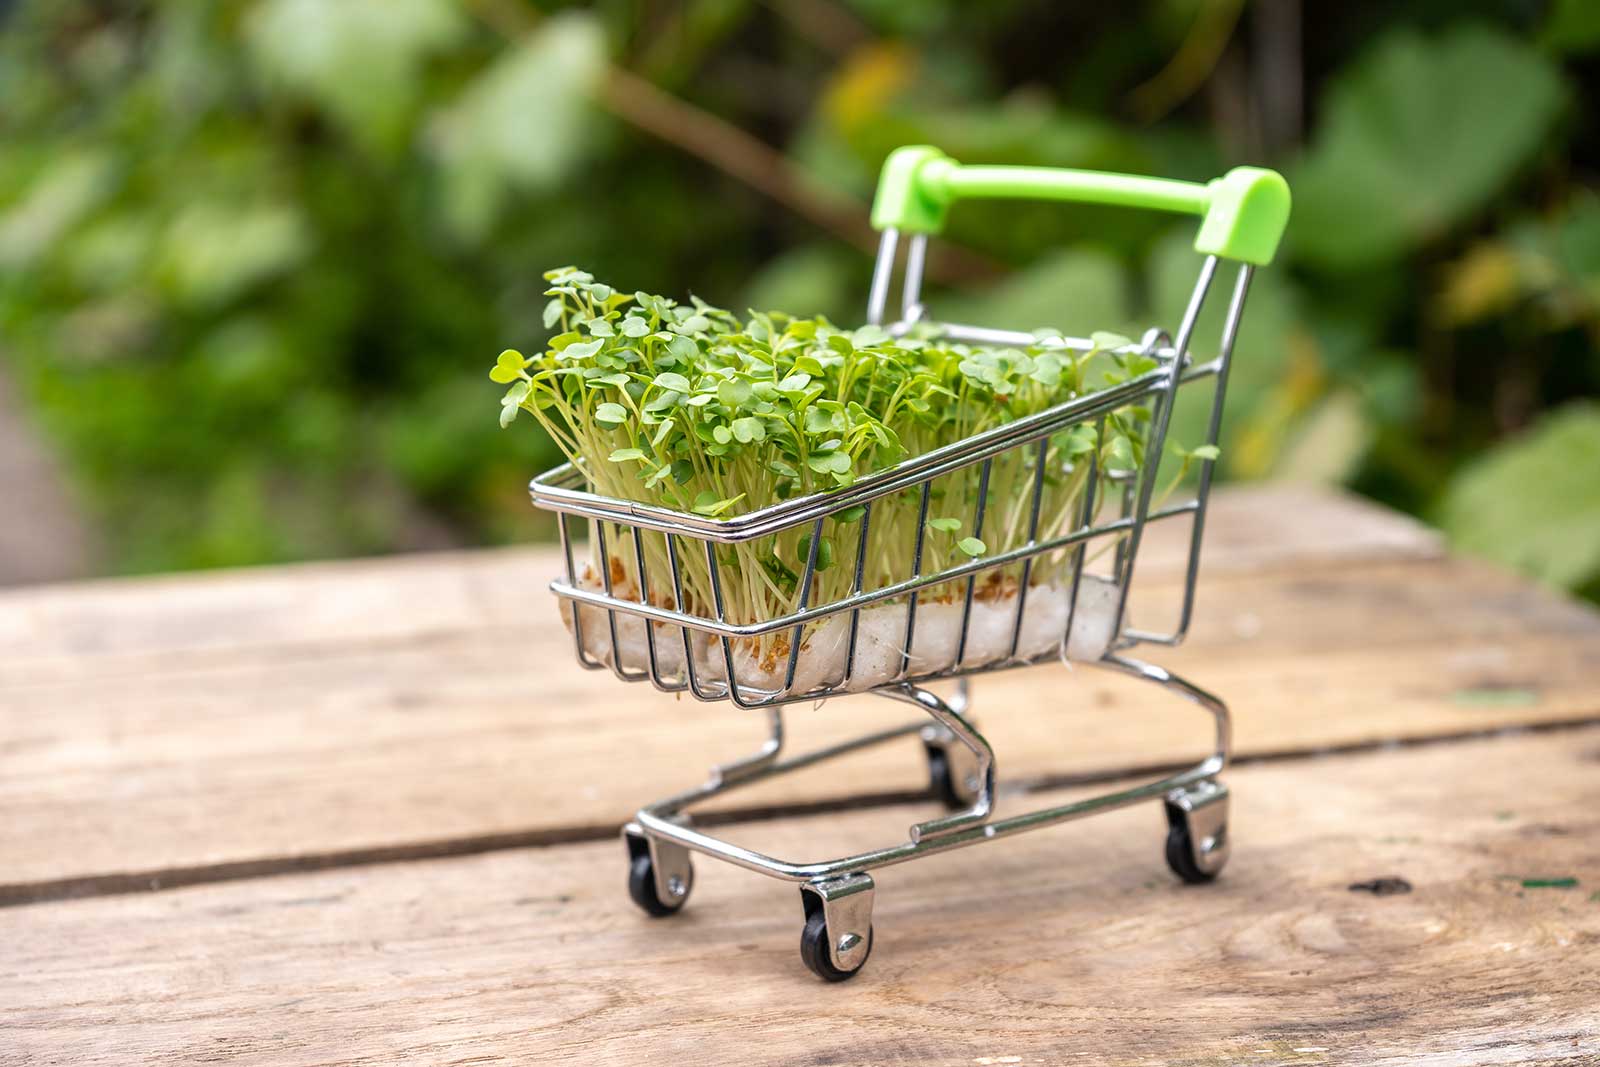 Miniature grocery cart with sprouts